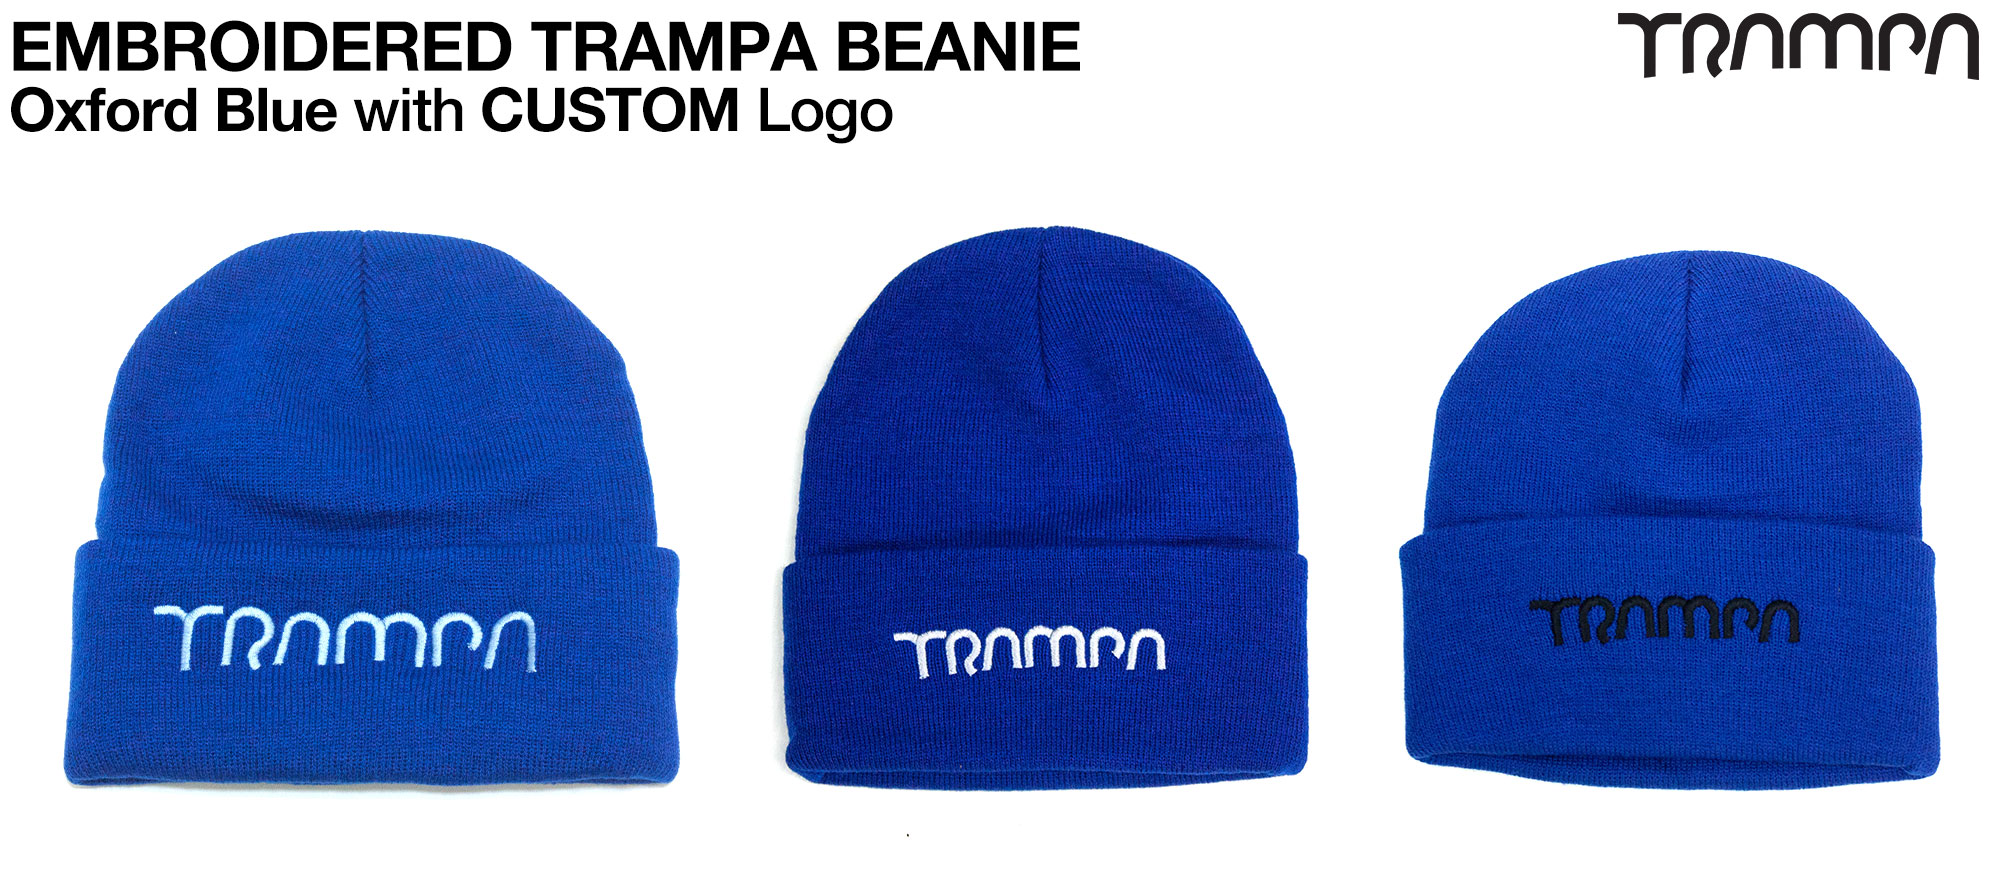 OXFORD BLUE Beanie hat with EMBROIDERED TRAMPA logo  - Double thick turn over for extra warmth 